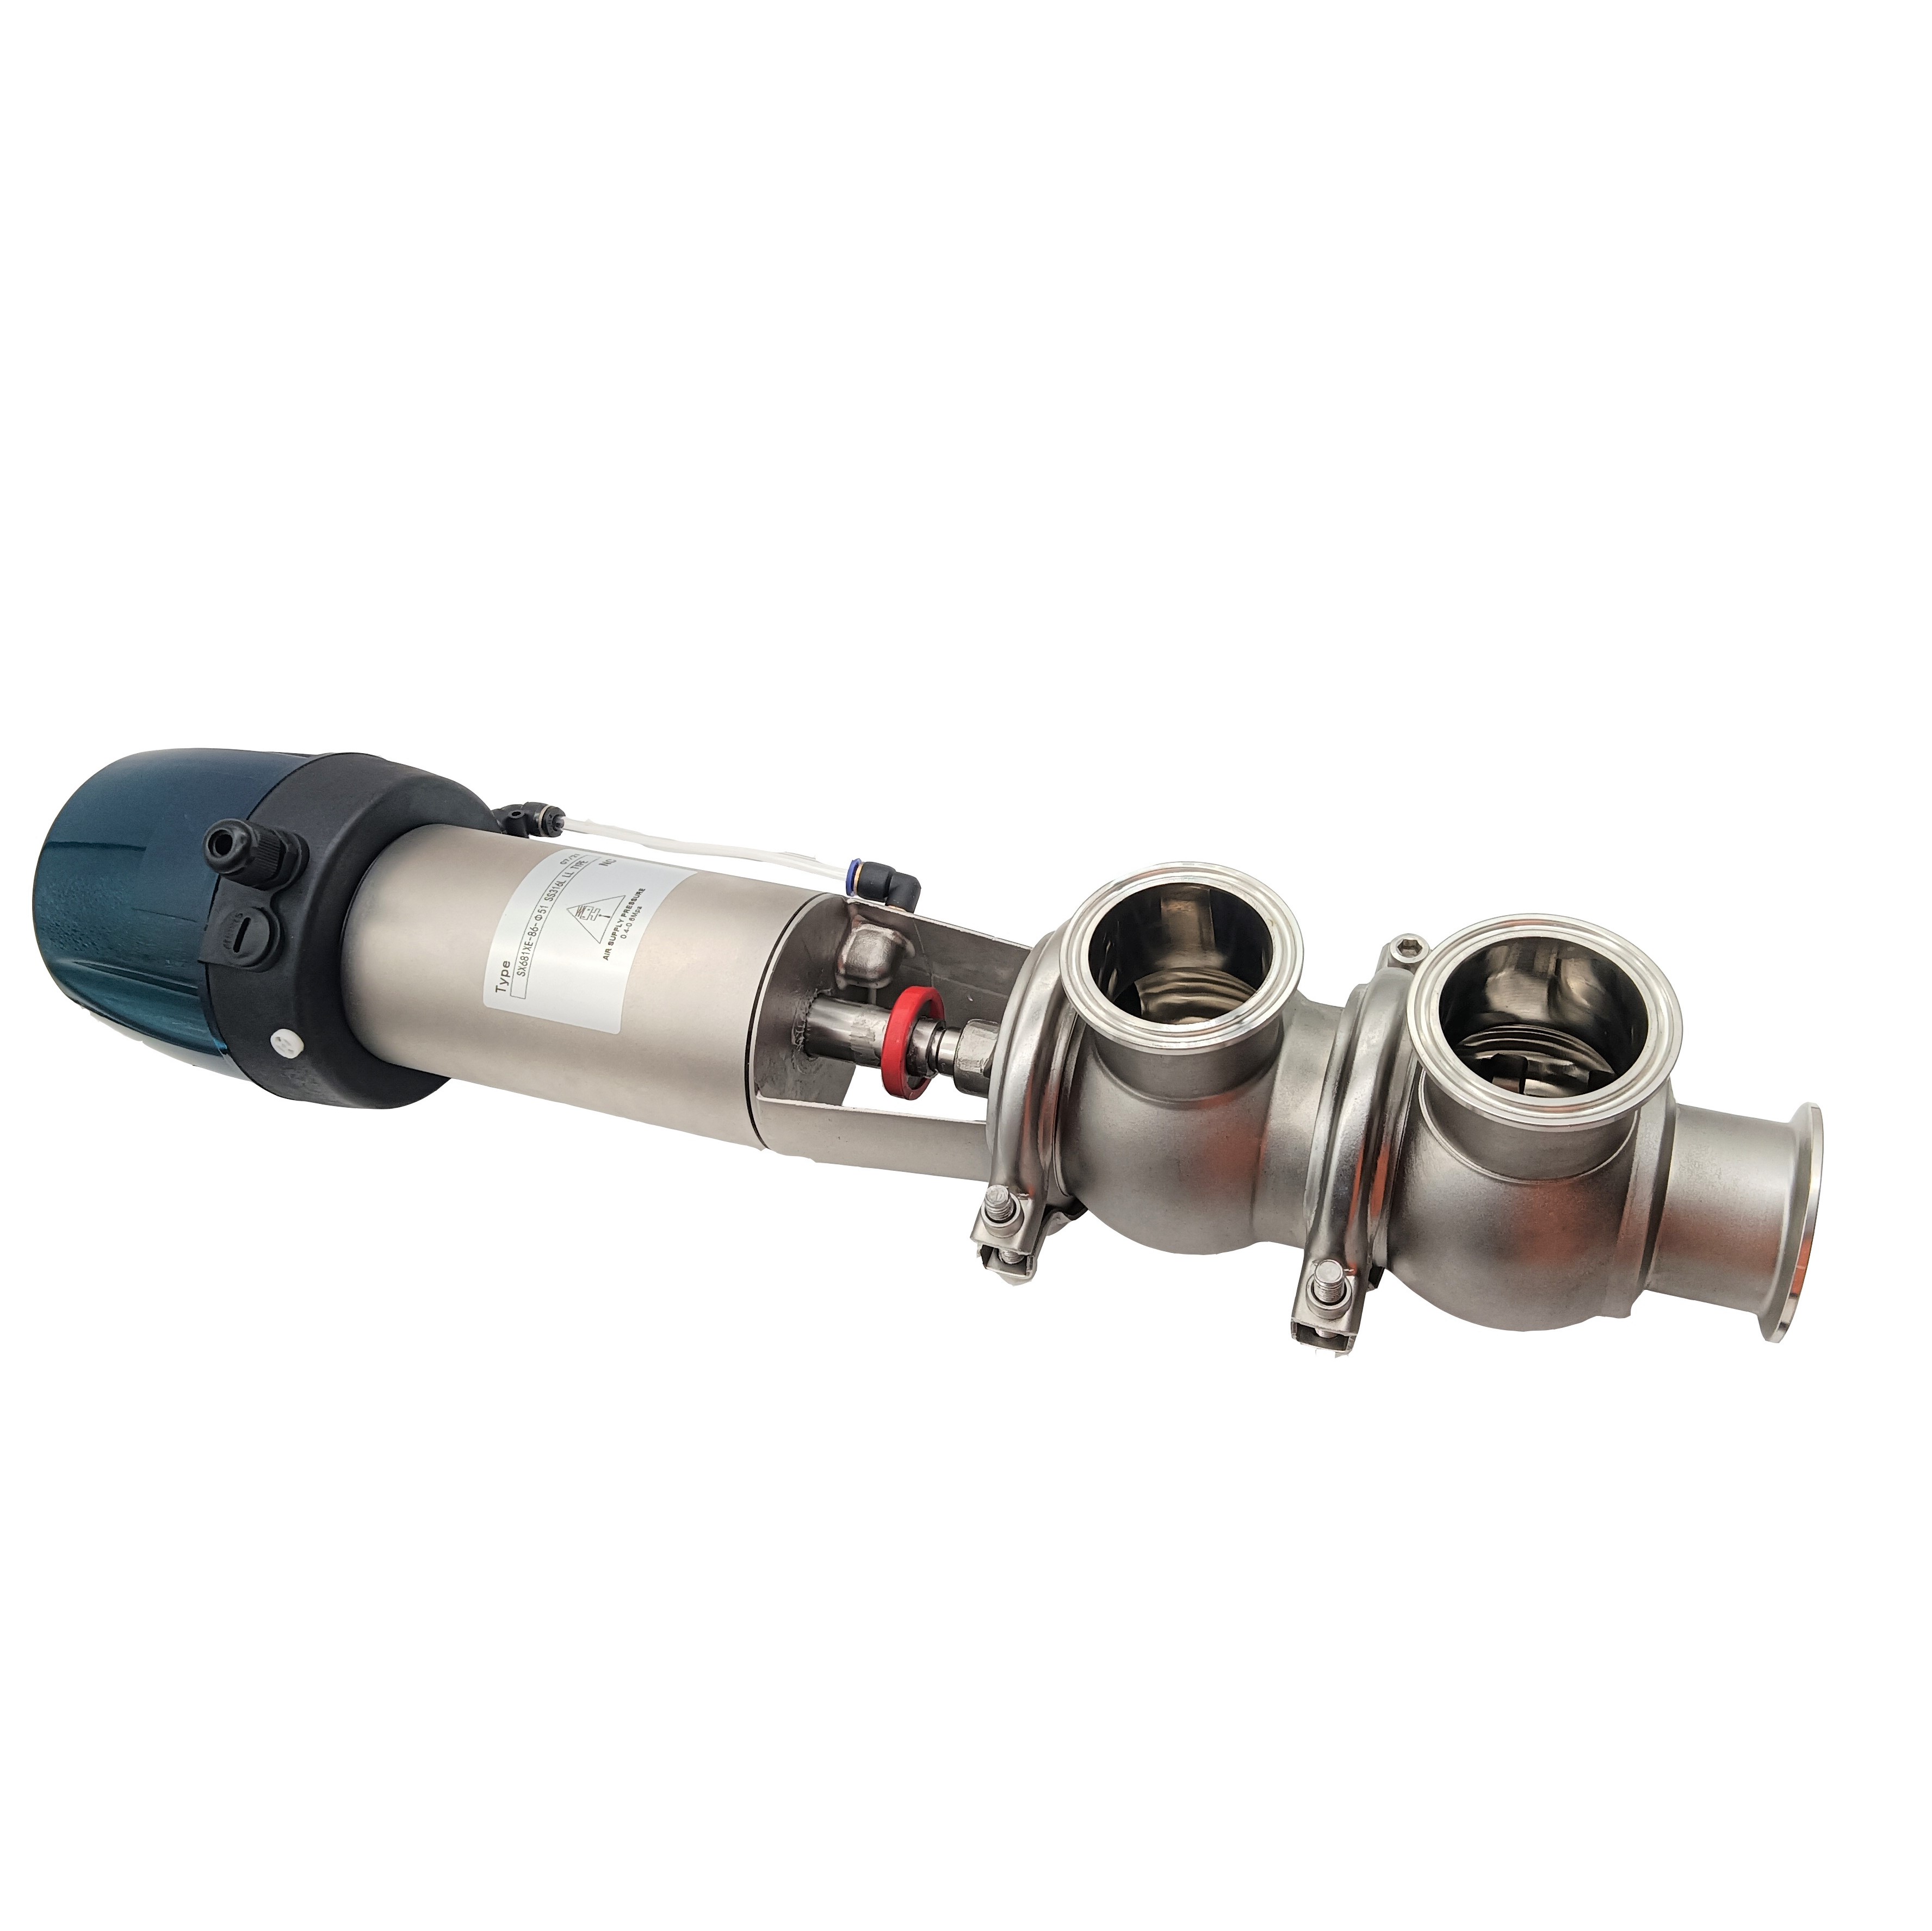 Stainless Steel Sanitary 3-way 21 Model LL Type Pneumatic Flow Diverter Division Valve with C-top Control Head